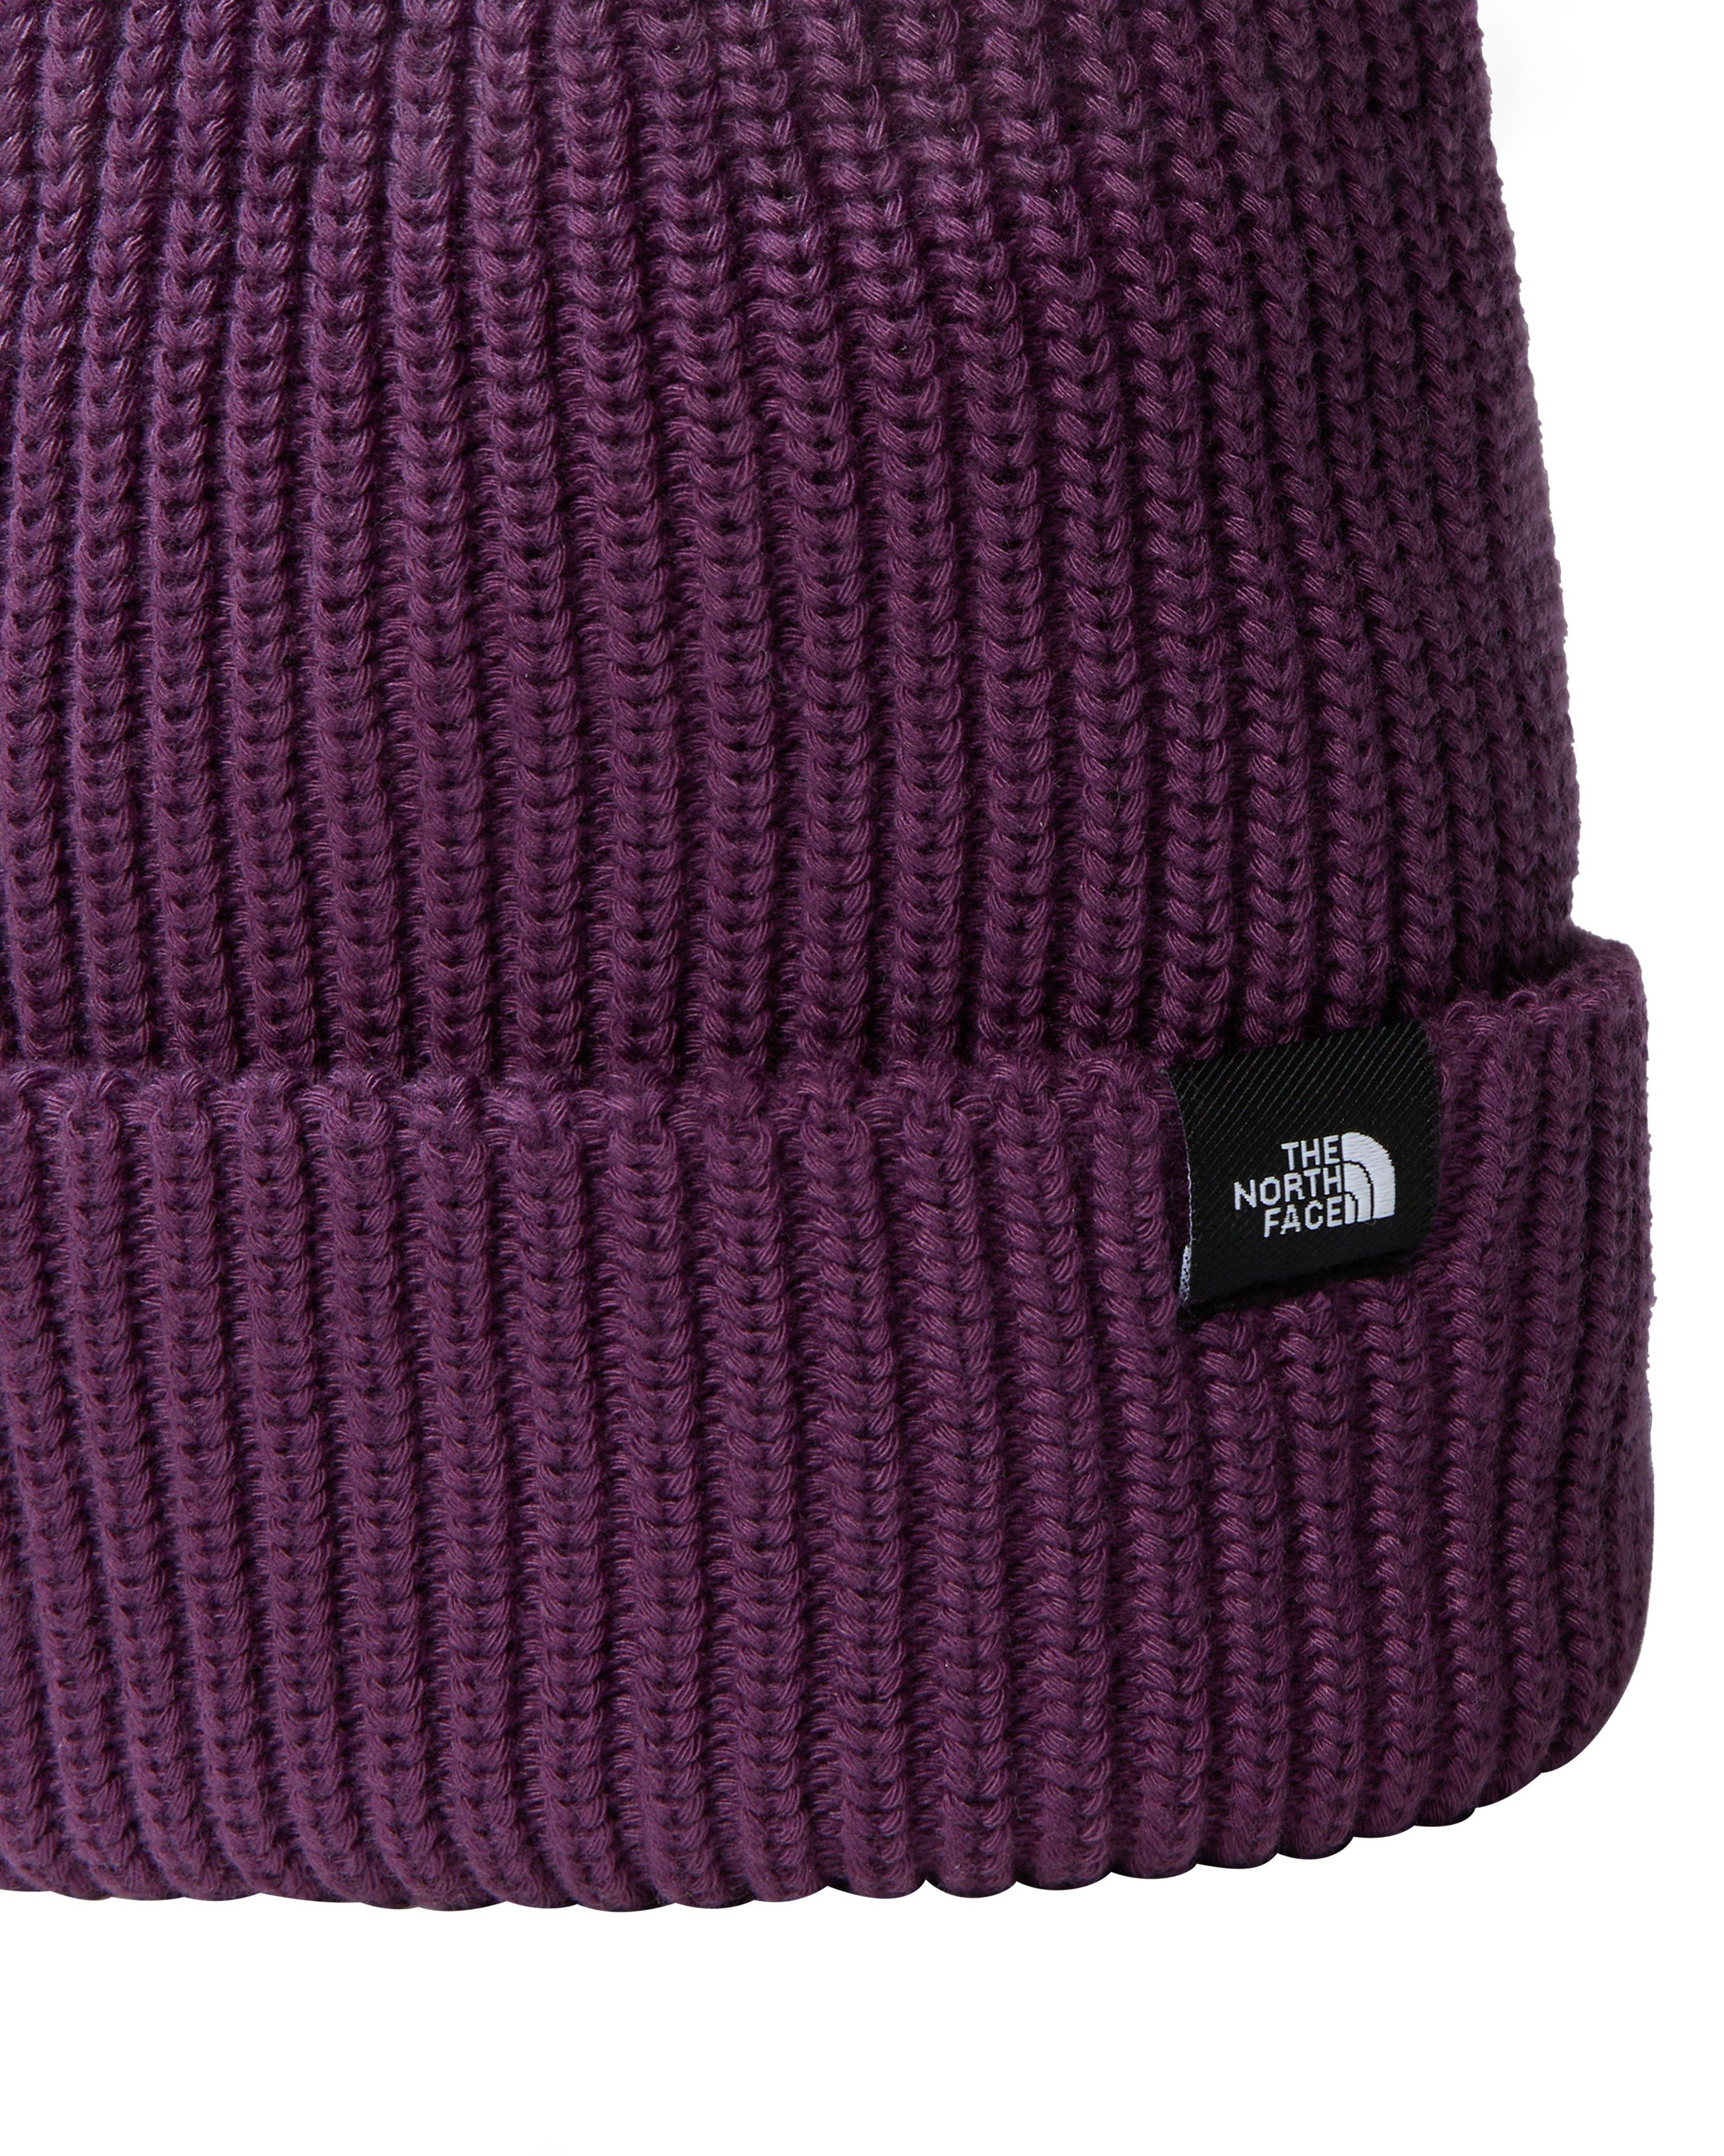 The North Face Fisherman Beanie -  Purple